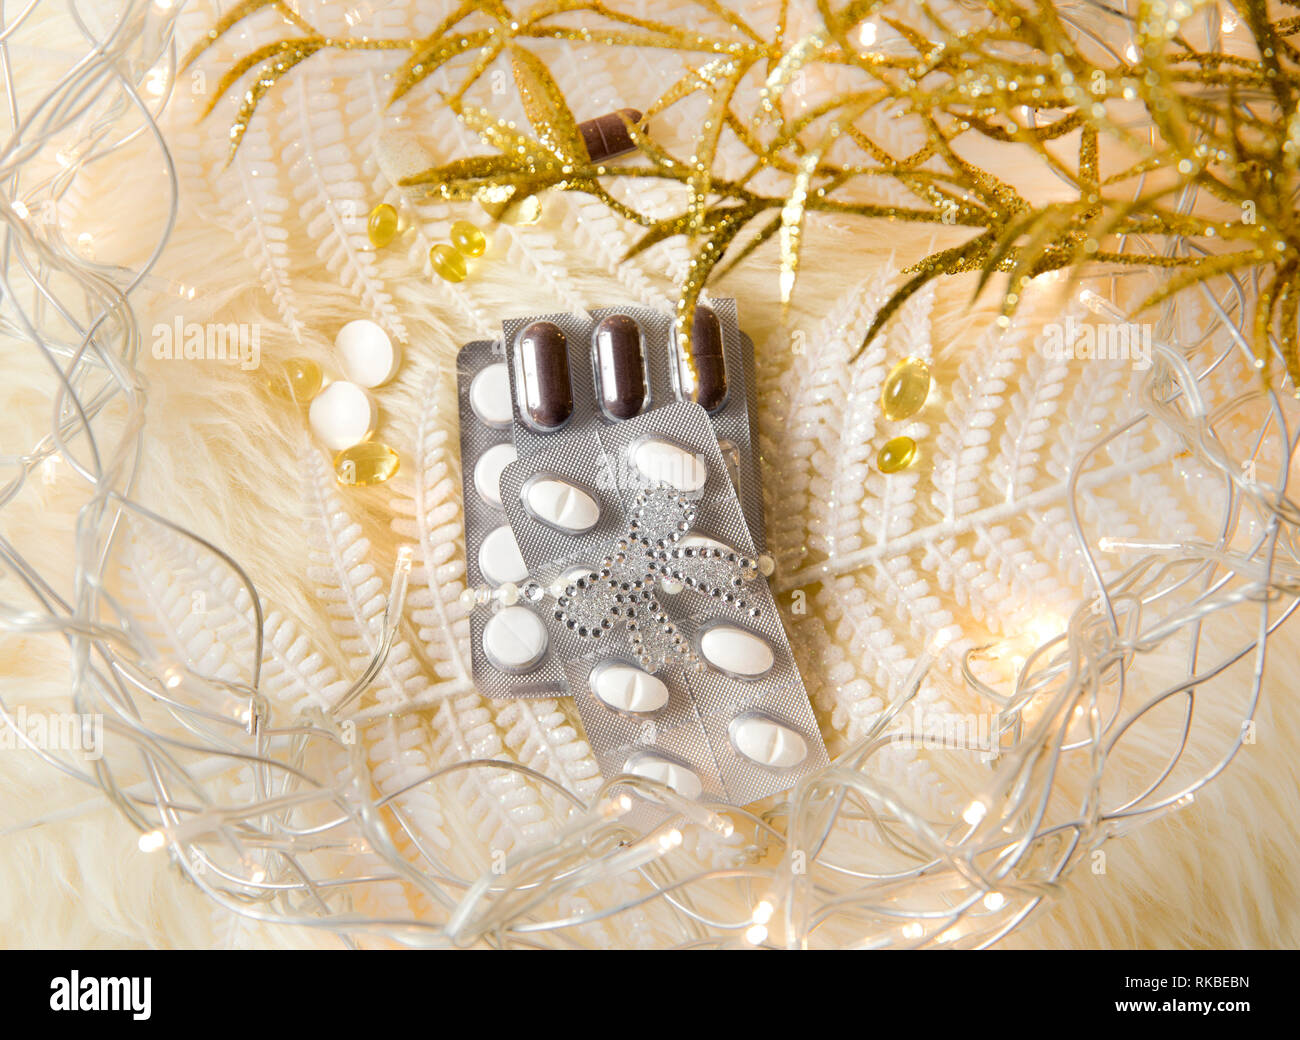 Top view of different pills vitamins as a Christmas gift idea concept on white fluffy lambskin with white decorative leaves and party lights. Recoveri Stock Photo